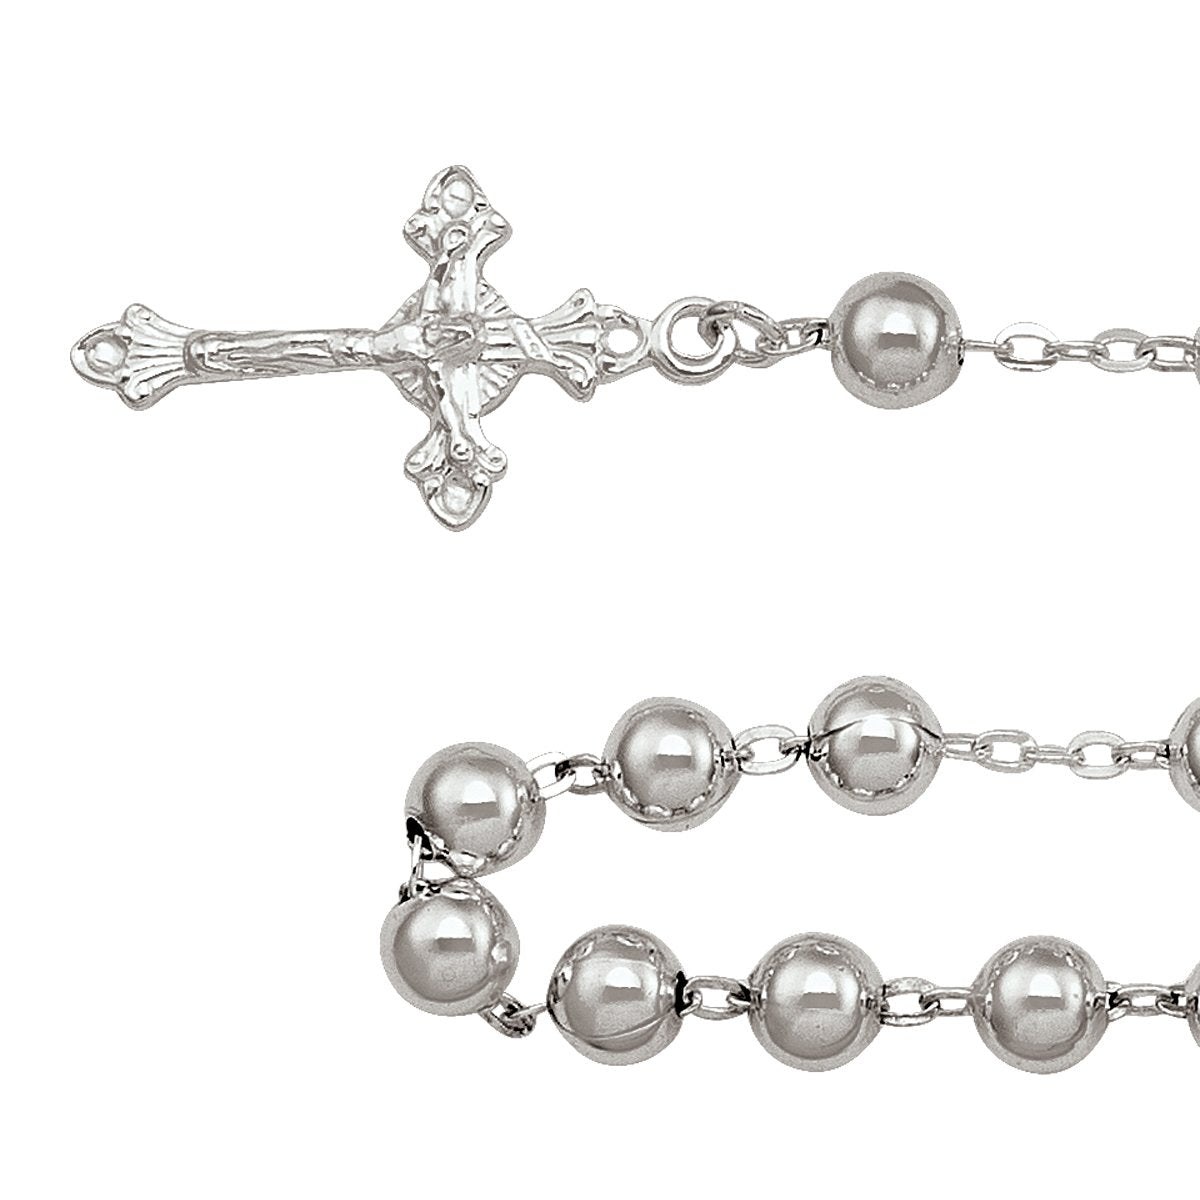 STERLING SILVER ROSARY